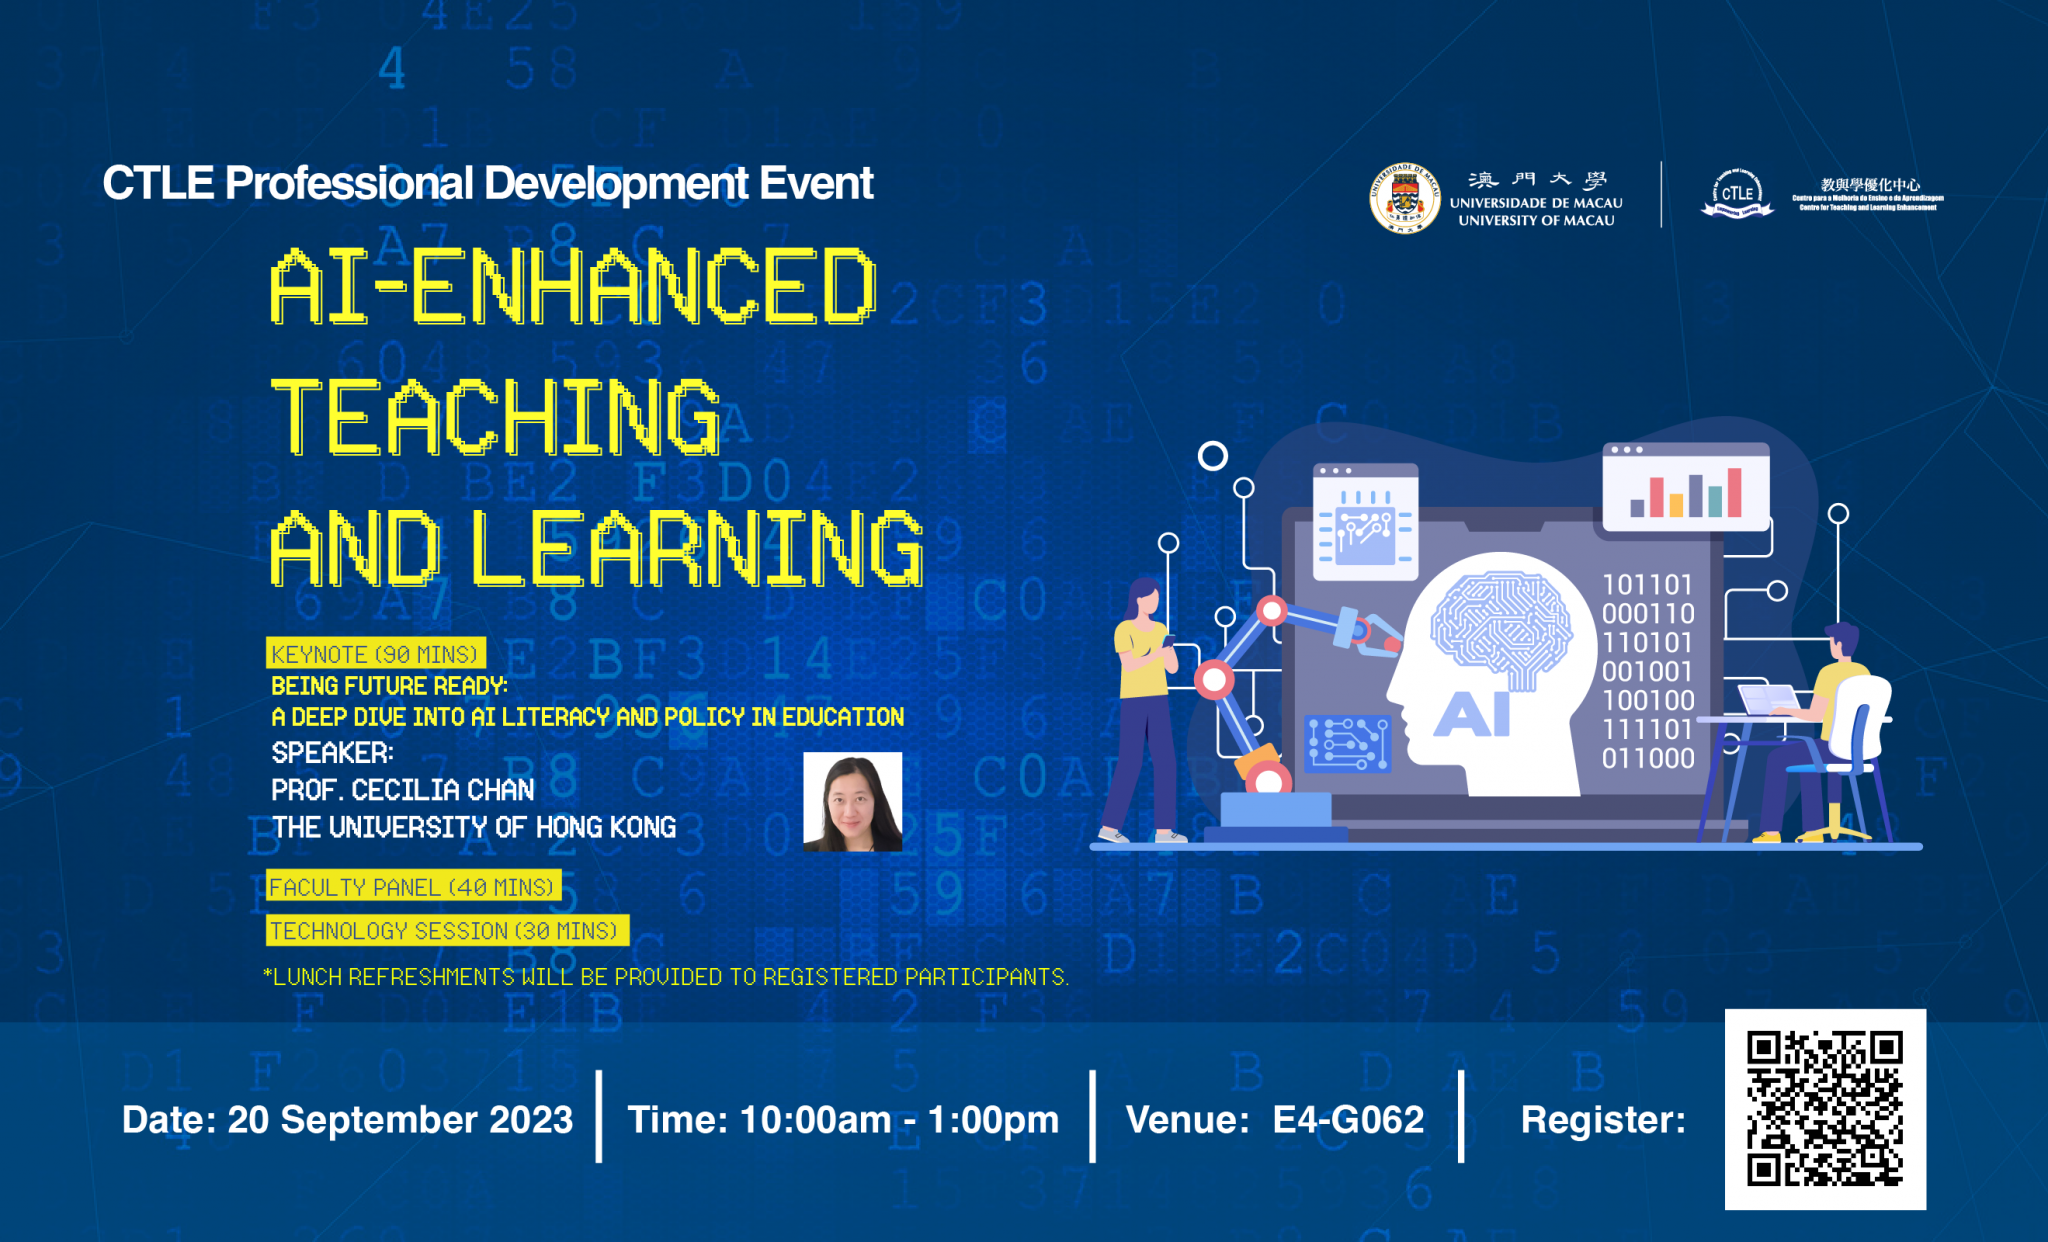 Prof. Cecilia Chan was invited as a Keynote Speaker at the University of Macau on how AI-enhanced Teaching and Learning 